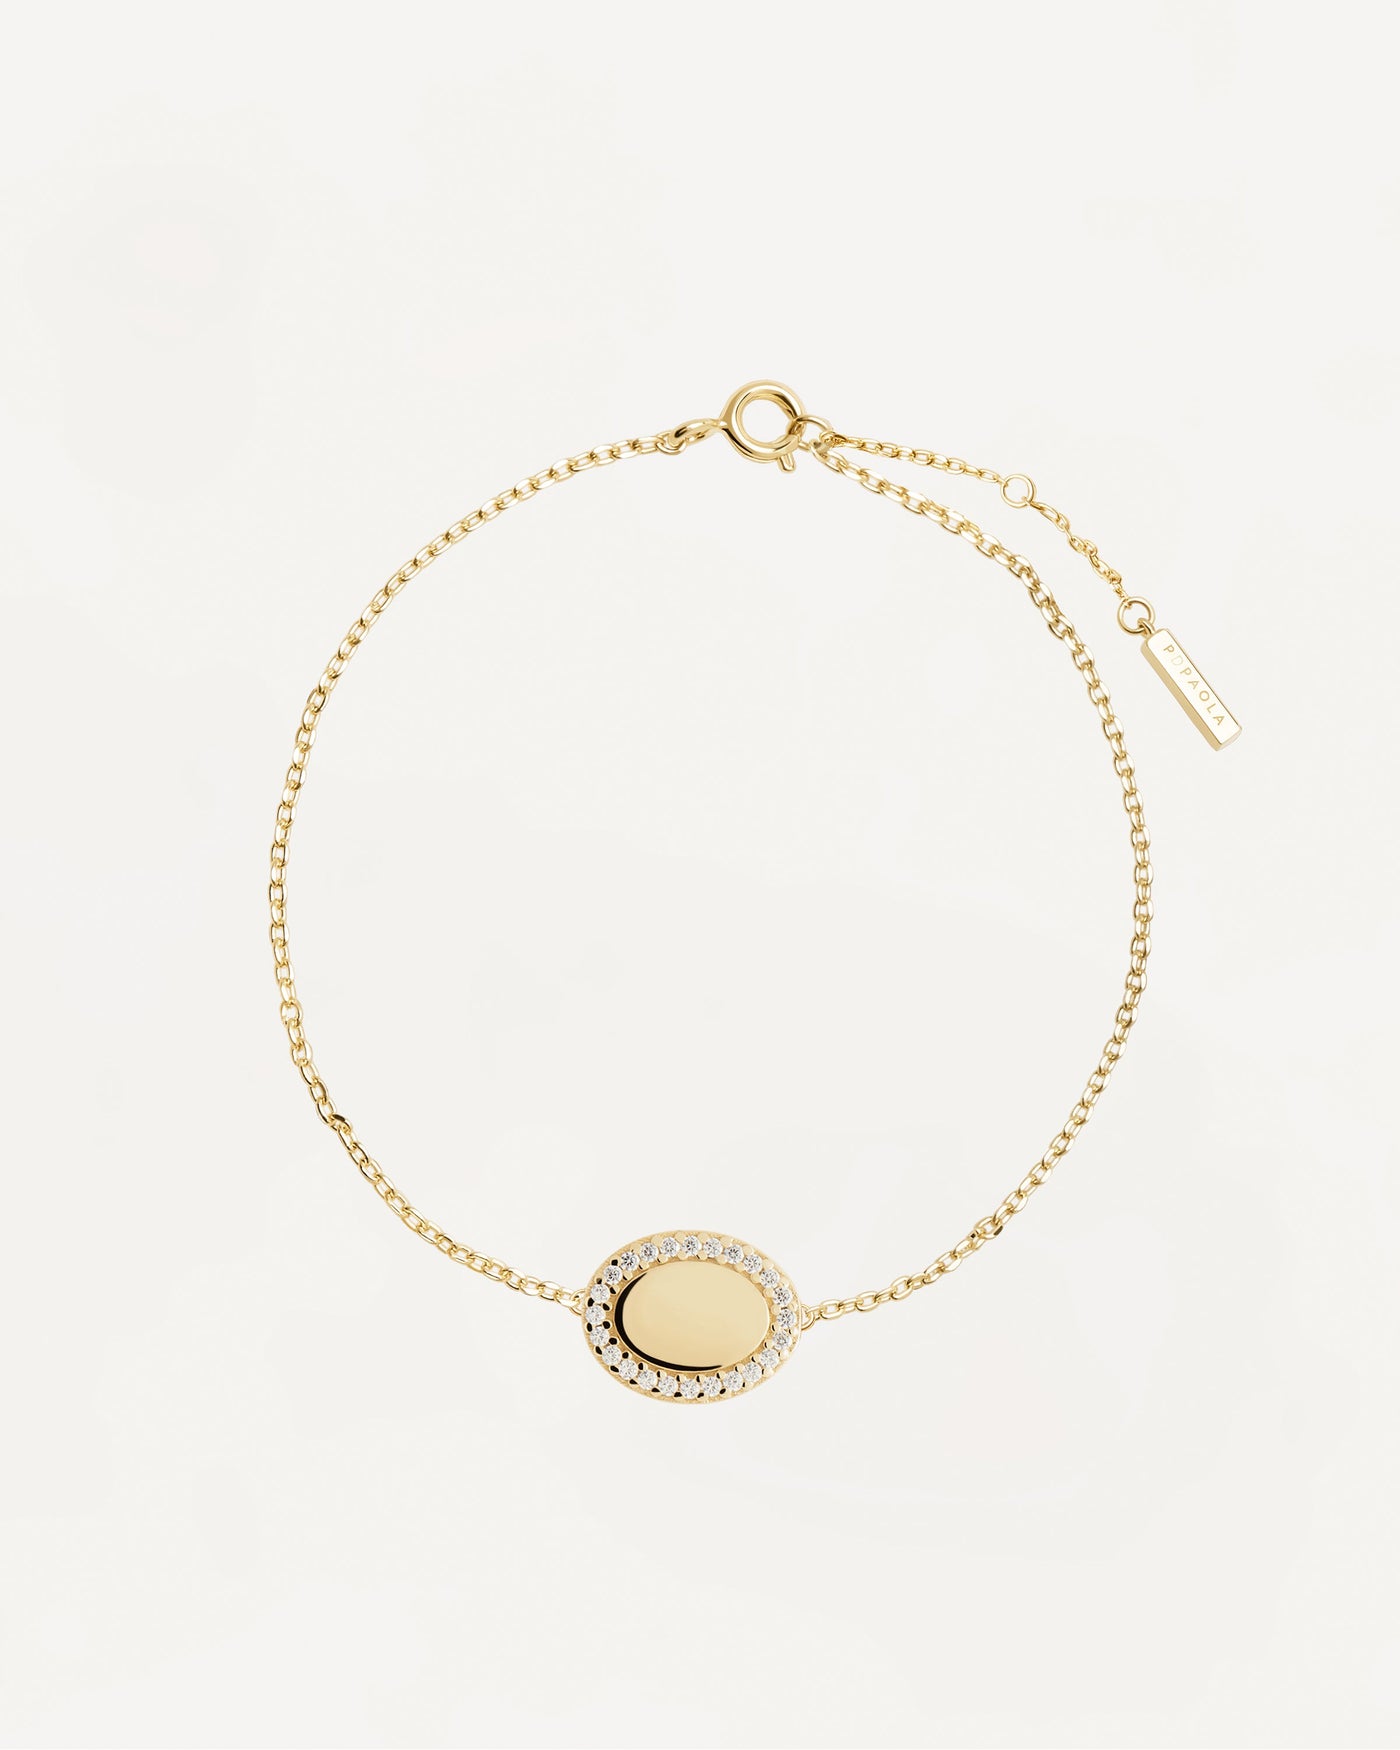 2023 Selection | Mademoiselle Bracelet. Gold-plated silver bracelet with engravable pendant circled by white zirconia. Get the latest arrival from PDPAOLA. Place your order safely and get this Best Seller. Free Shipping.